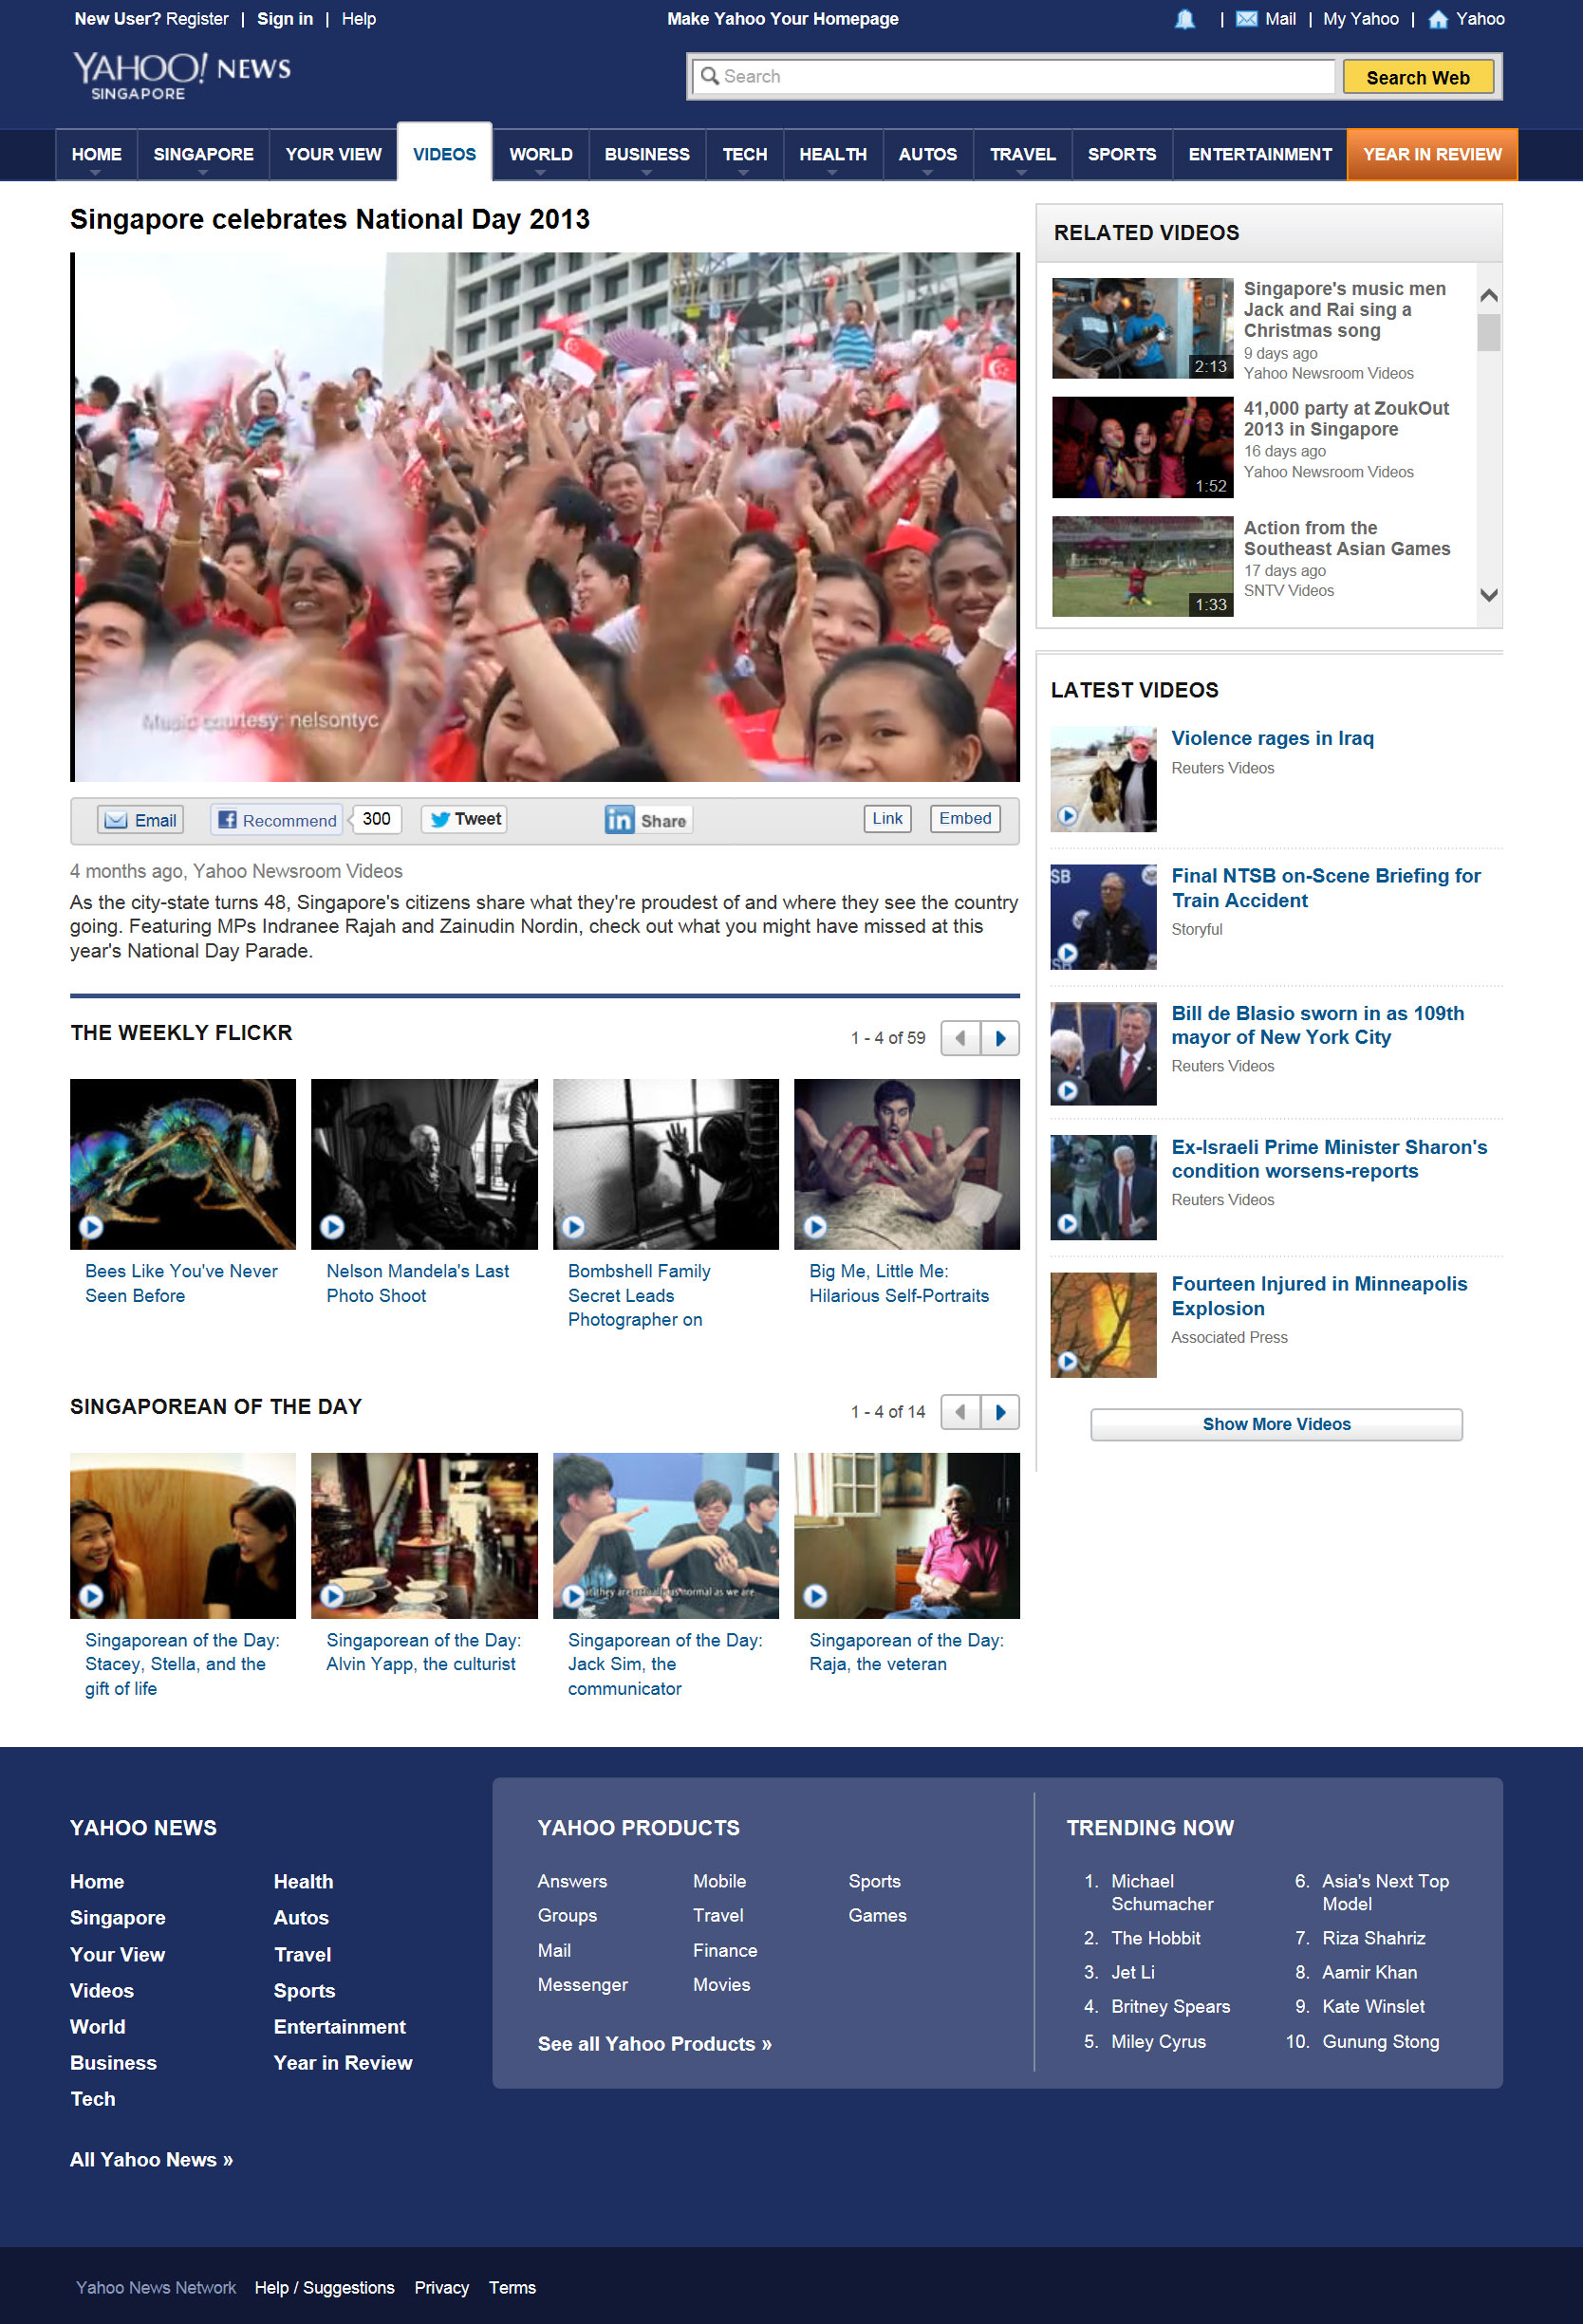 yahoo-news-singapore-national-day-feature-nelsontyc-song